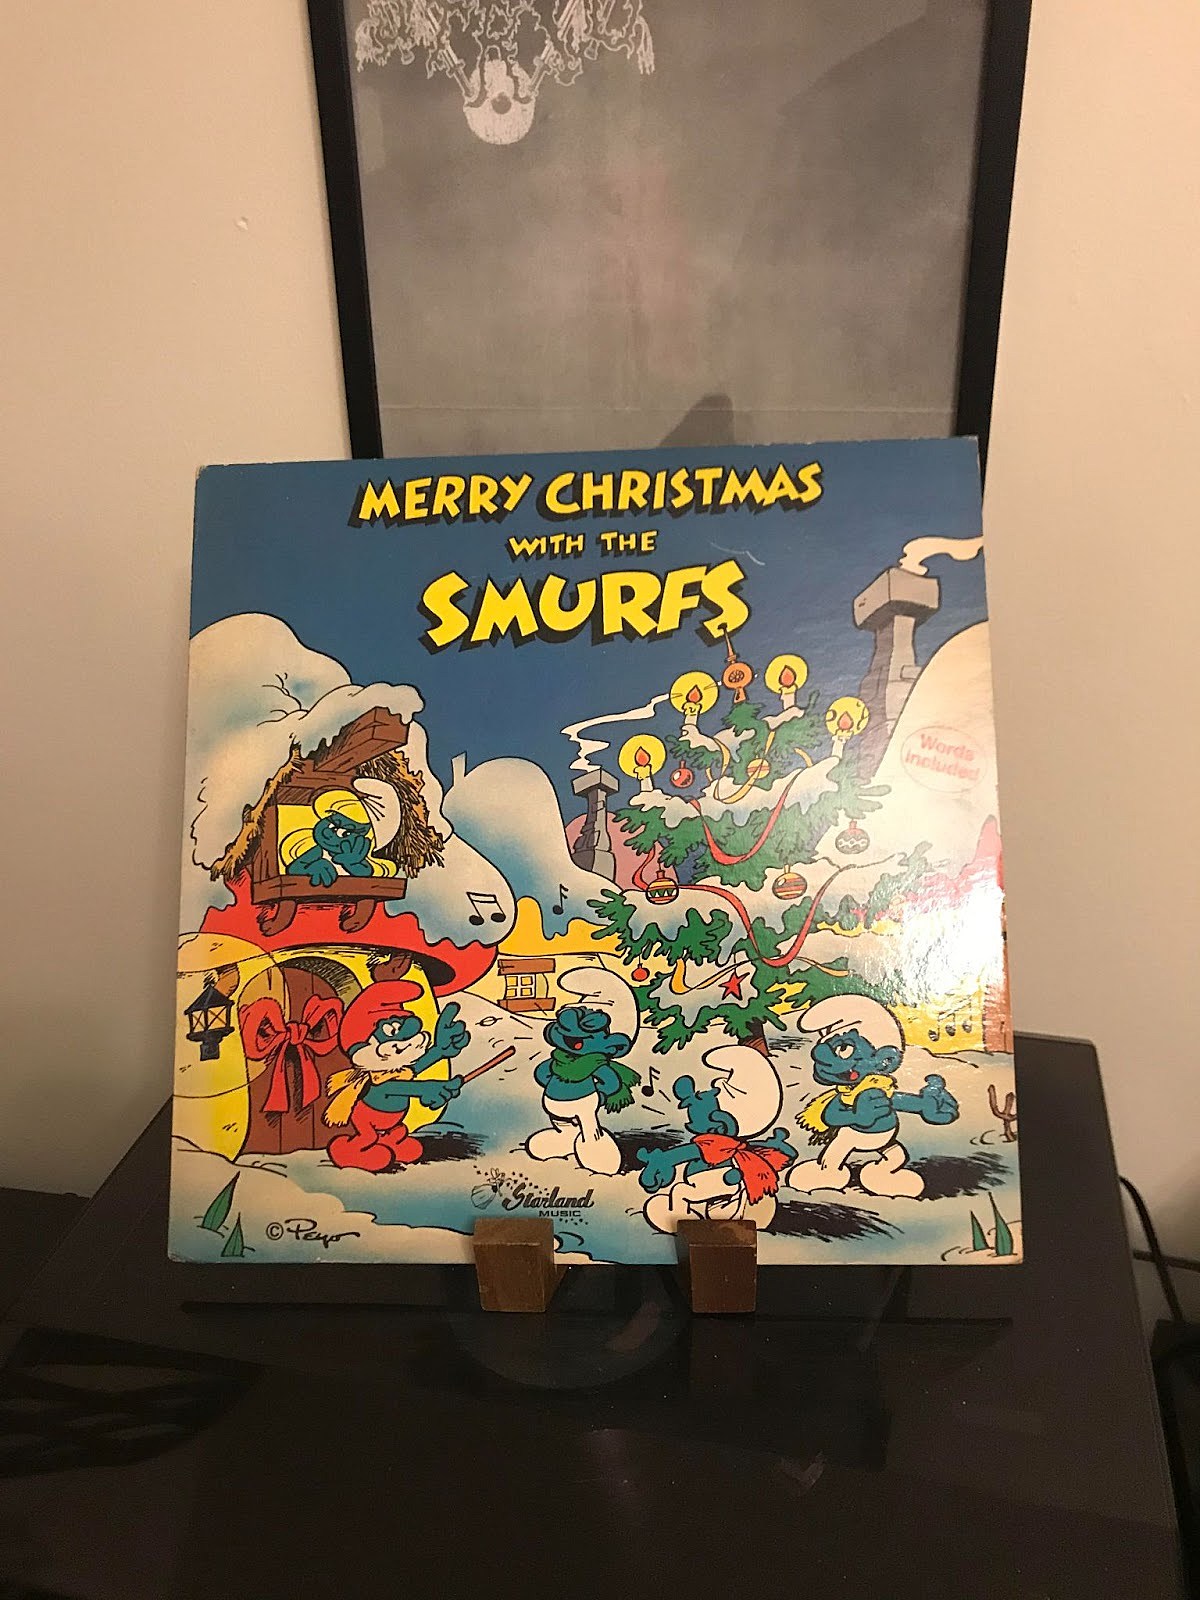 Merry Christmas with the Smurfs